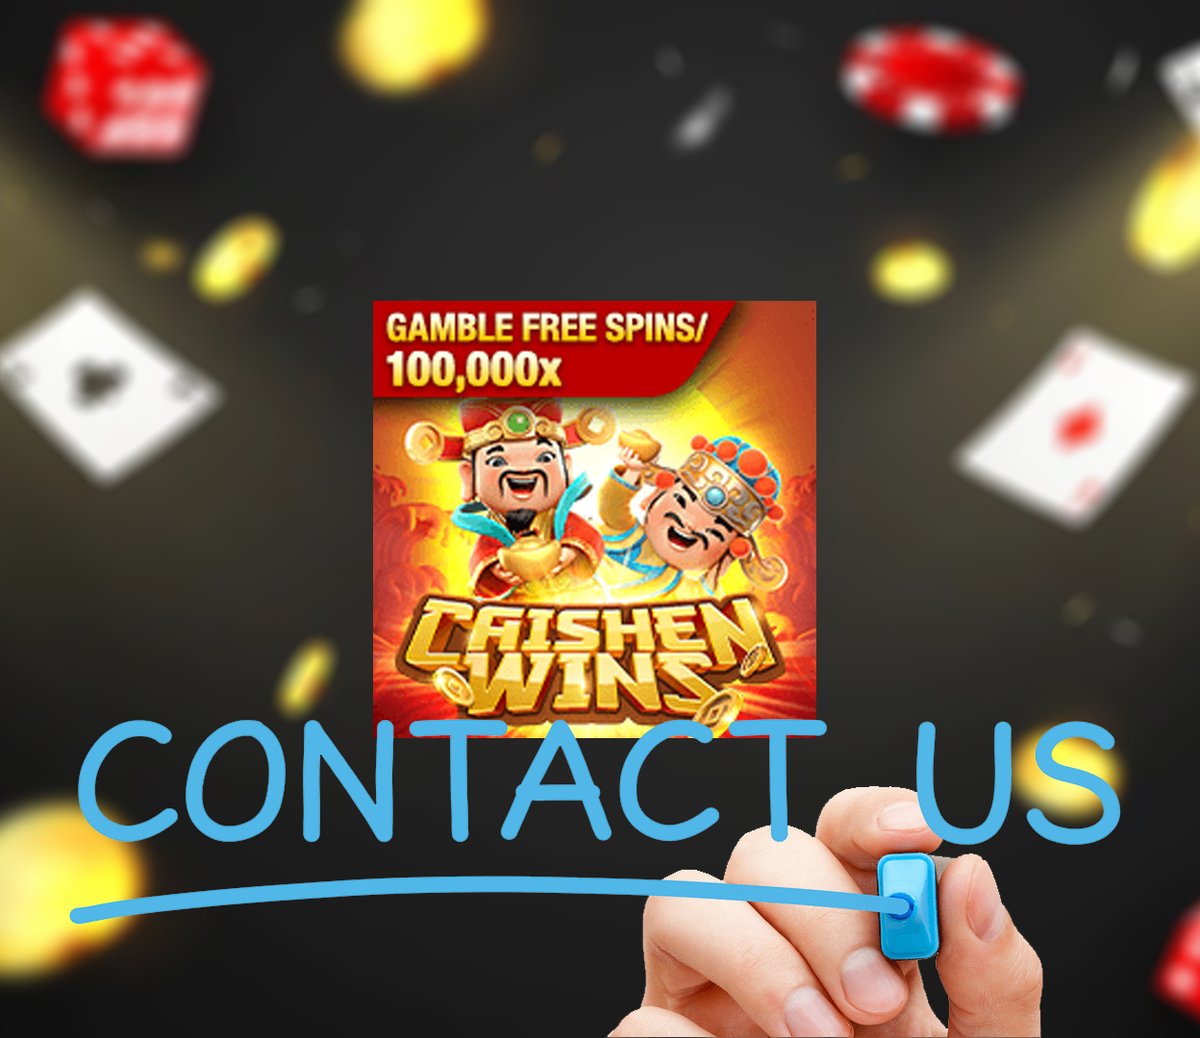 PGSLOT | BEST ONLINE CASINO GAME IN THAILAND (( Play Caishen Wins game on Pocket Game Soft Application now ))
ftdsg.org/pgslot/

#pgslot #pocketgamessoft #pggaming #pgonline